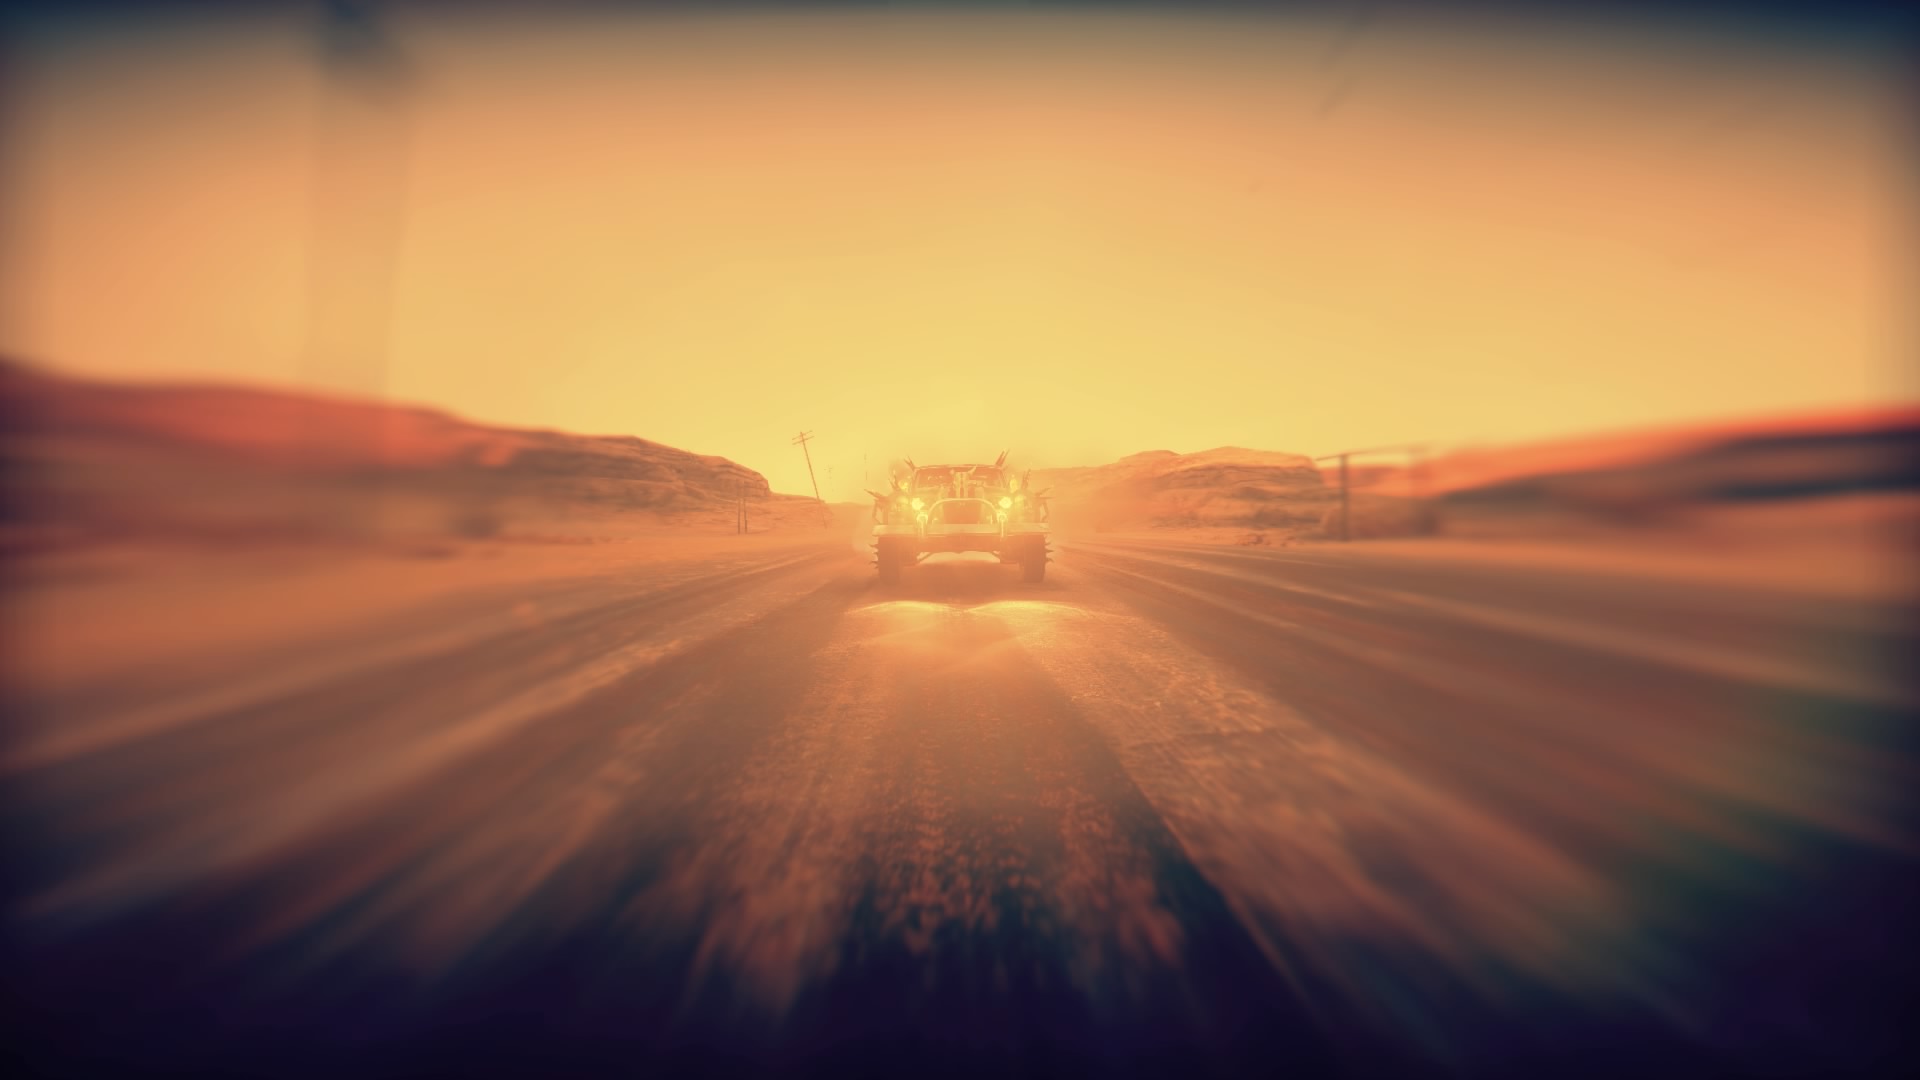 Here Are My Best Mad Max Screenshots. Show Us Yours.